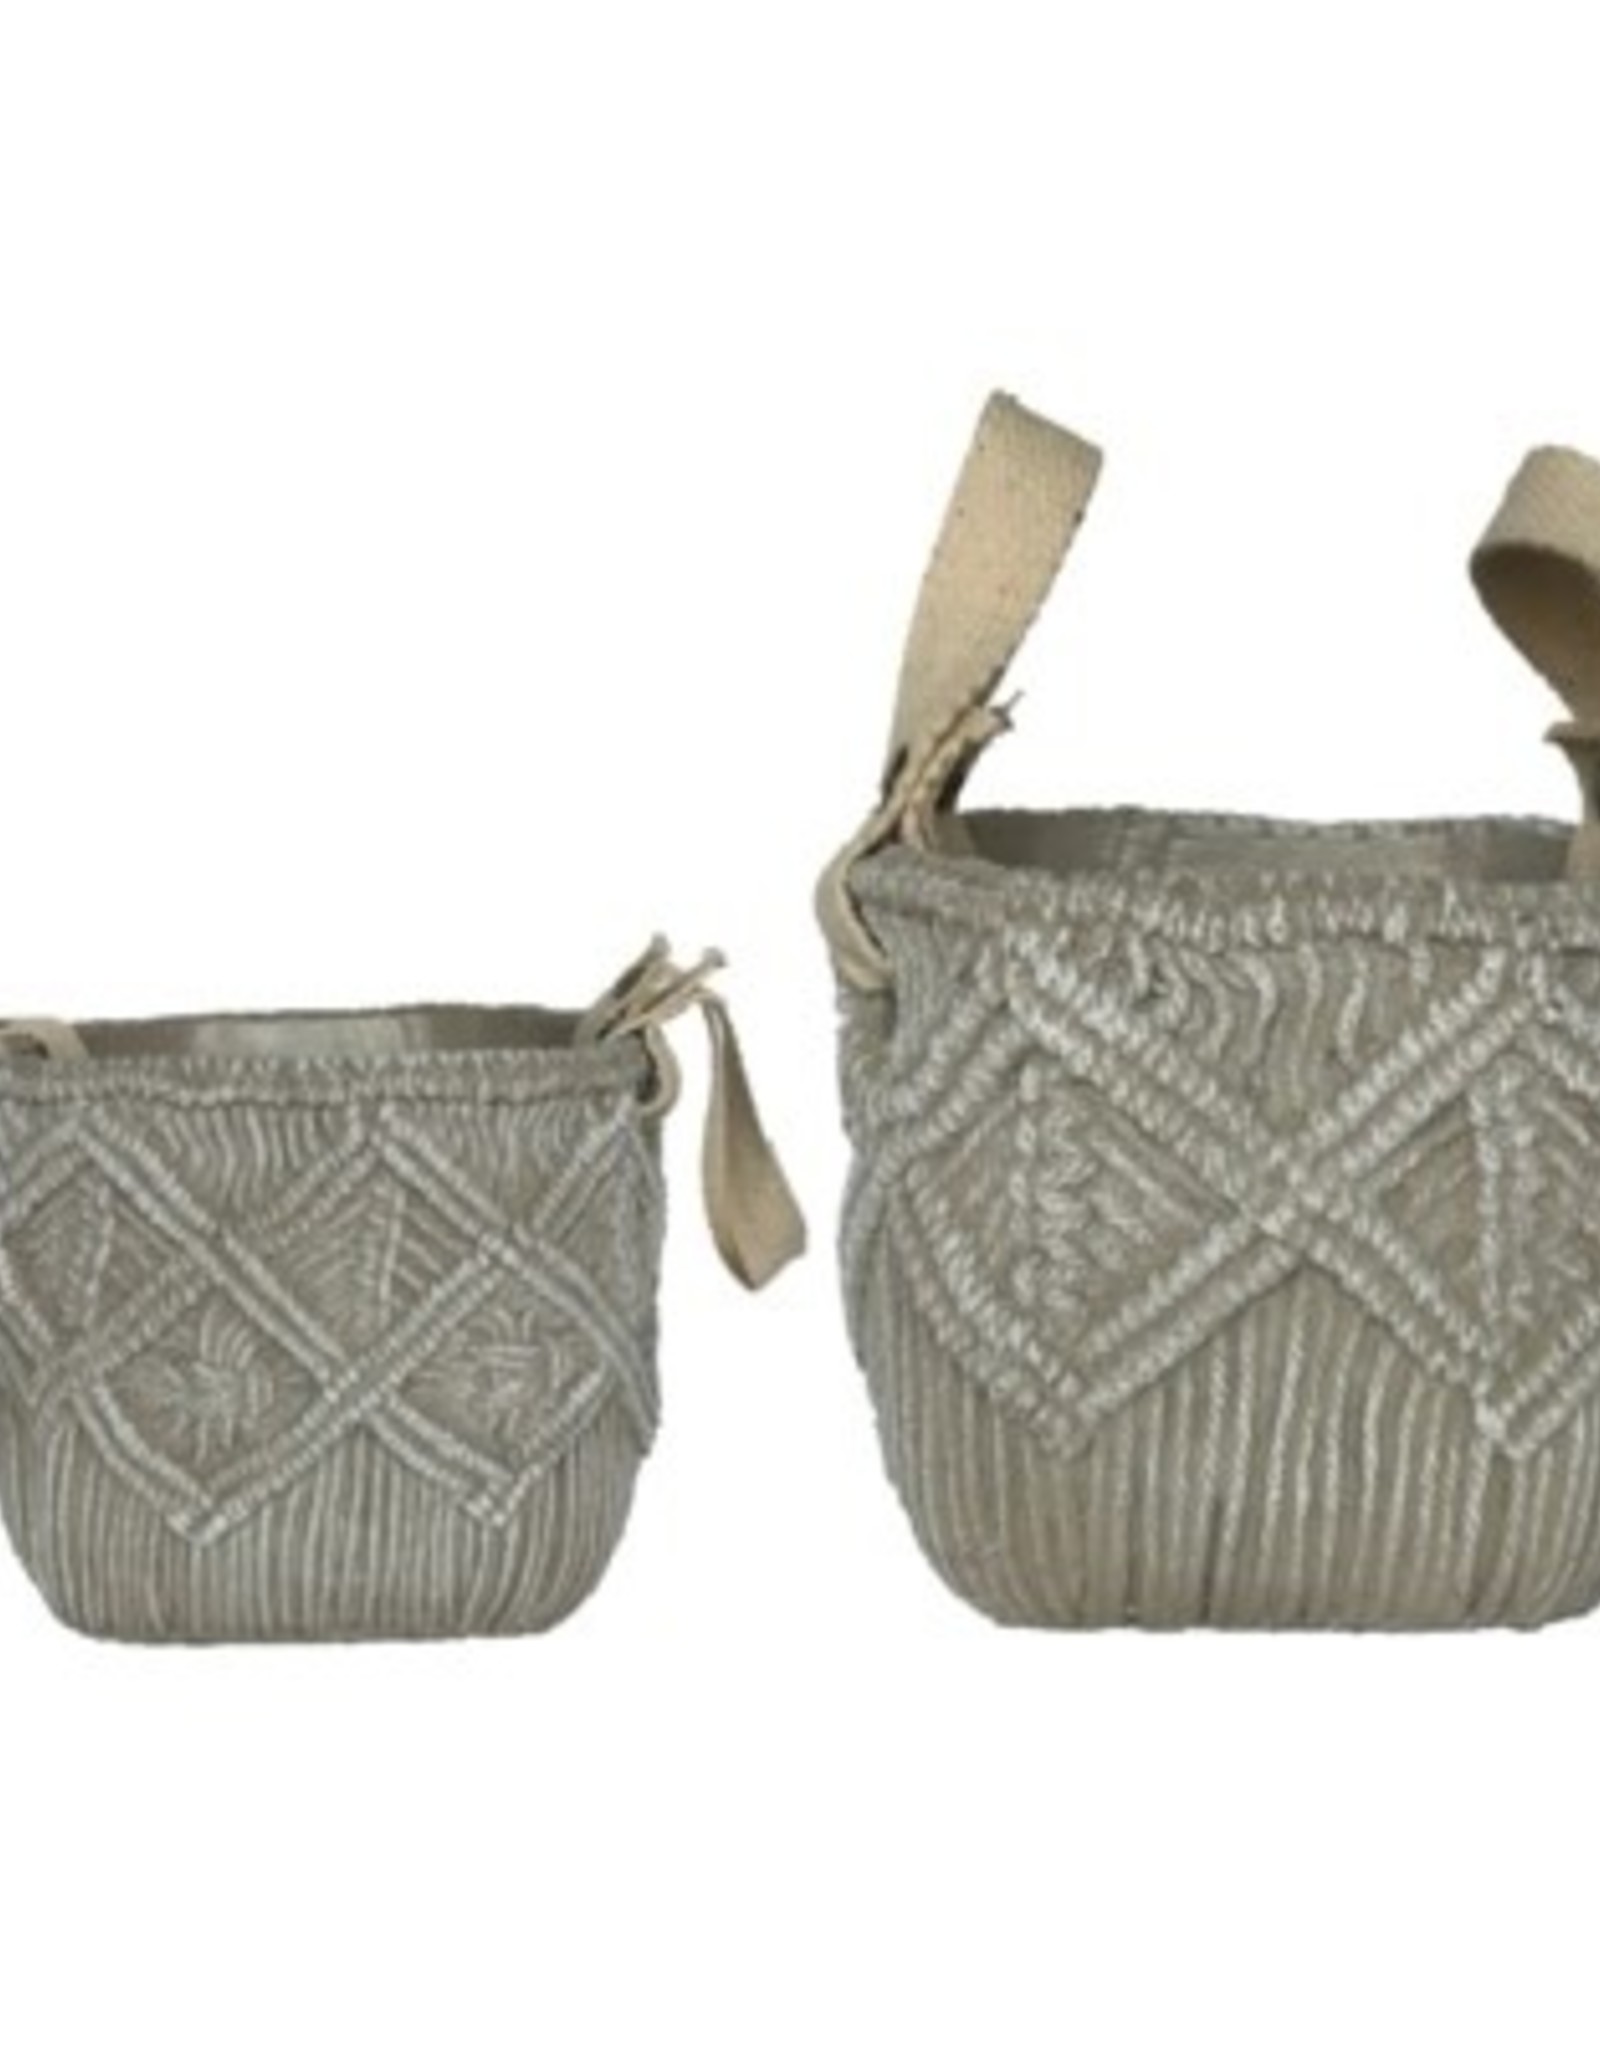 Grey Weave Cement Pot (small)